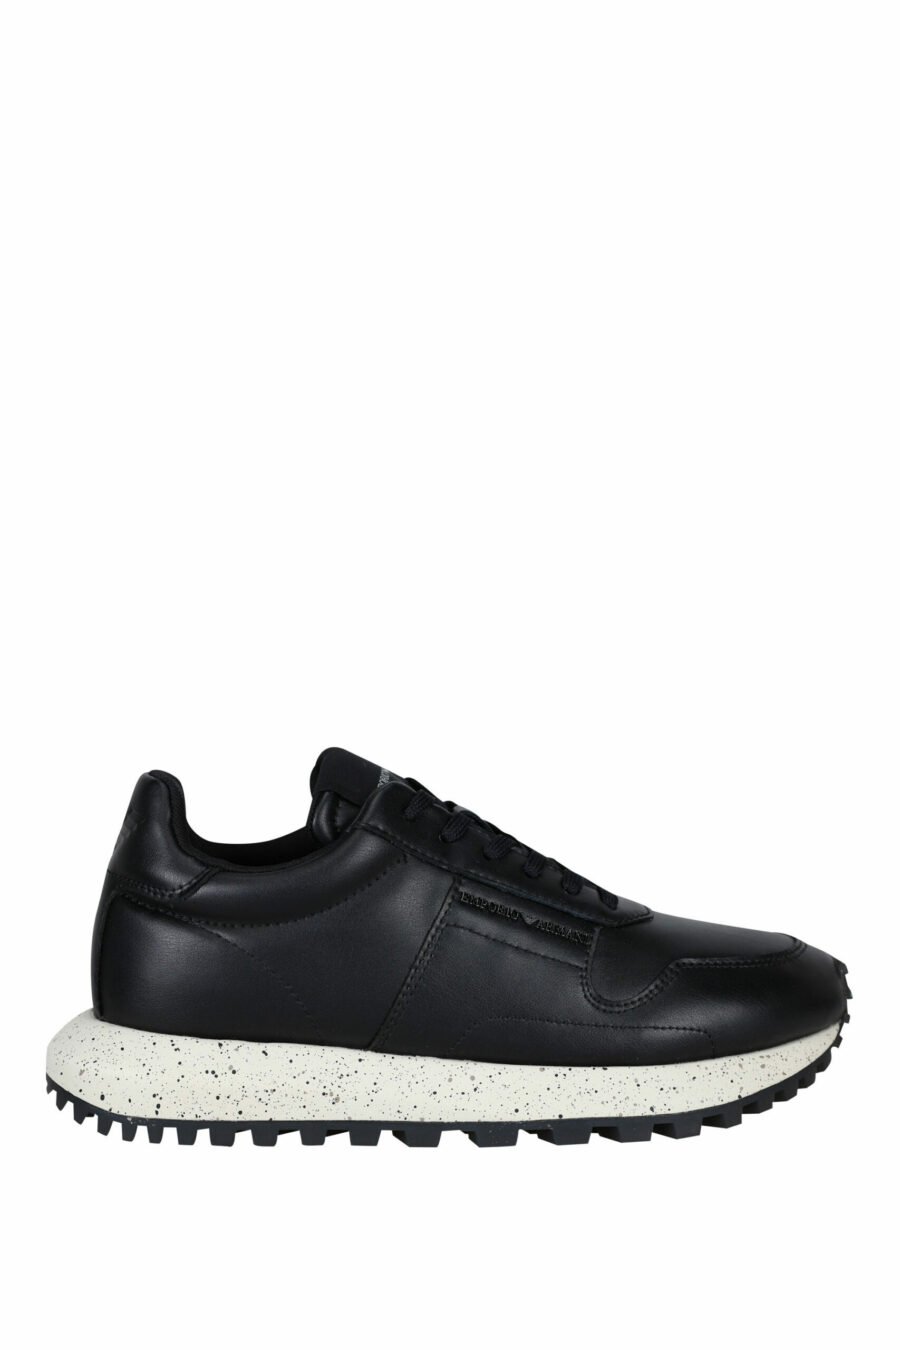 Black recycled leather trainers and minilogo - 8057767442187 scaled